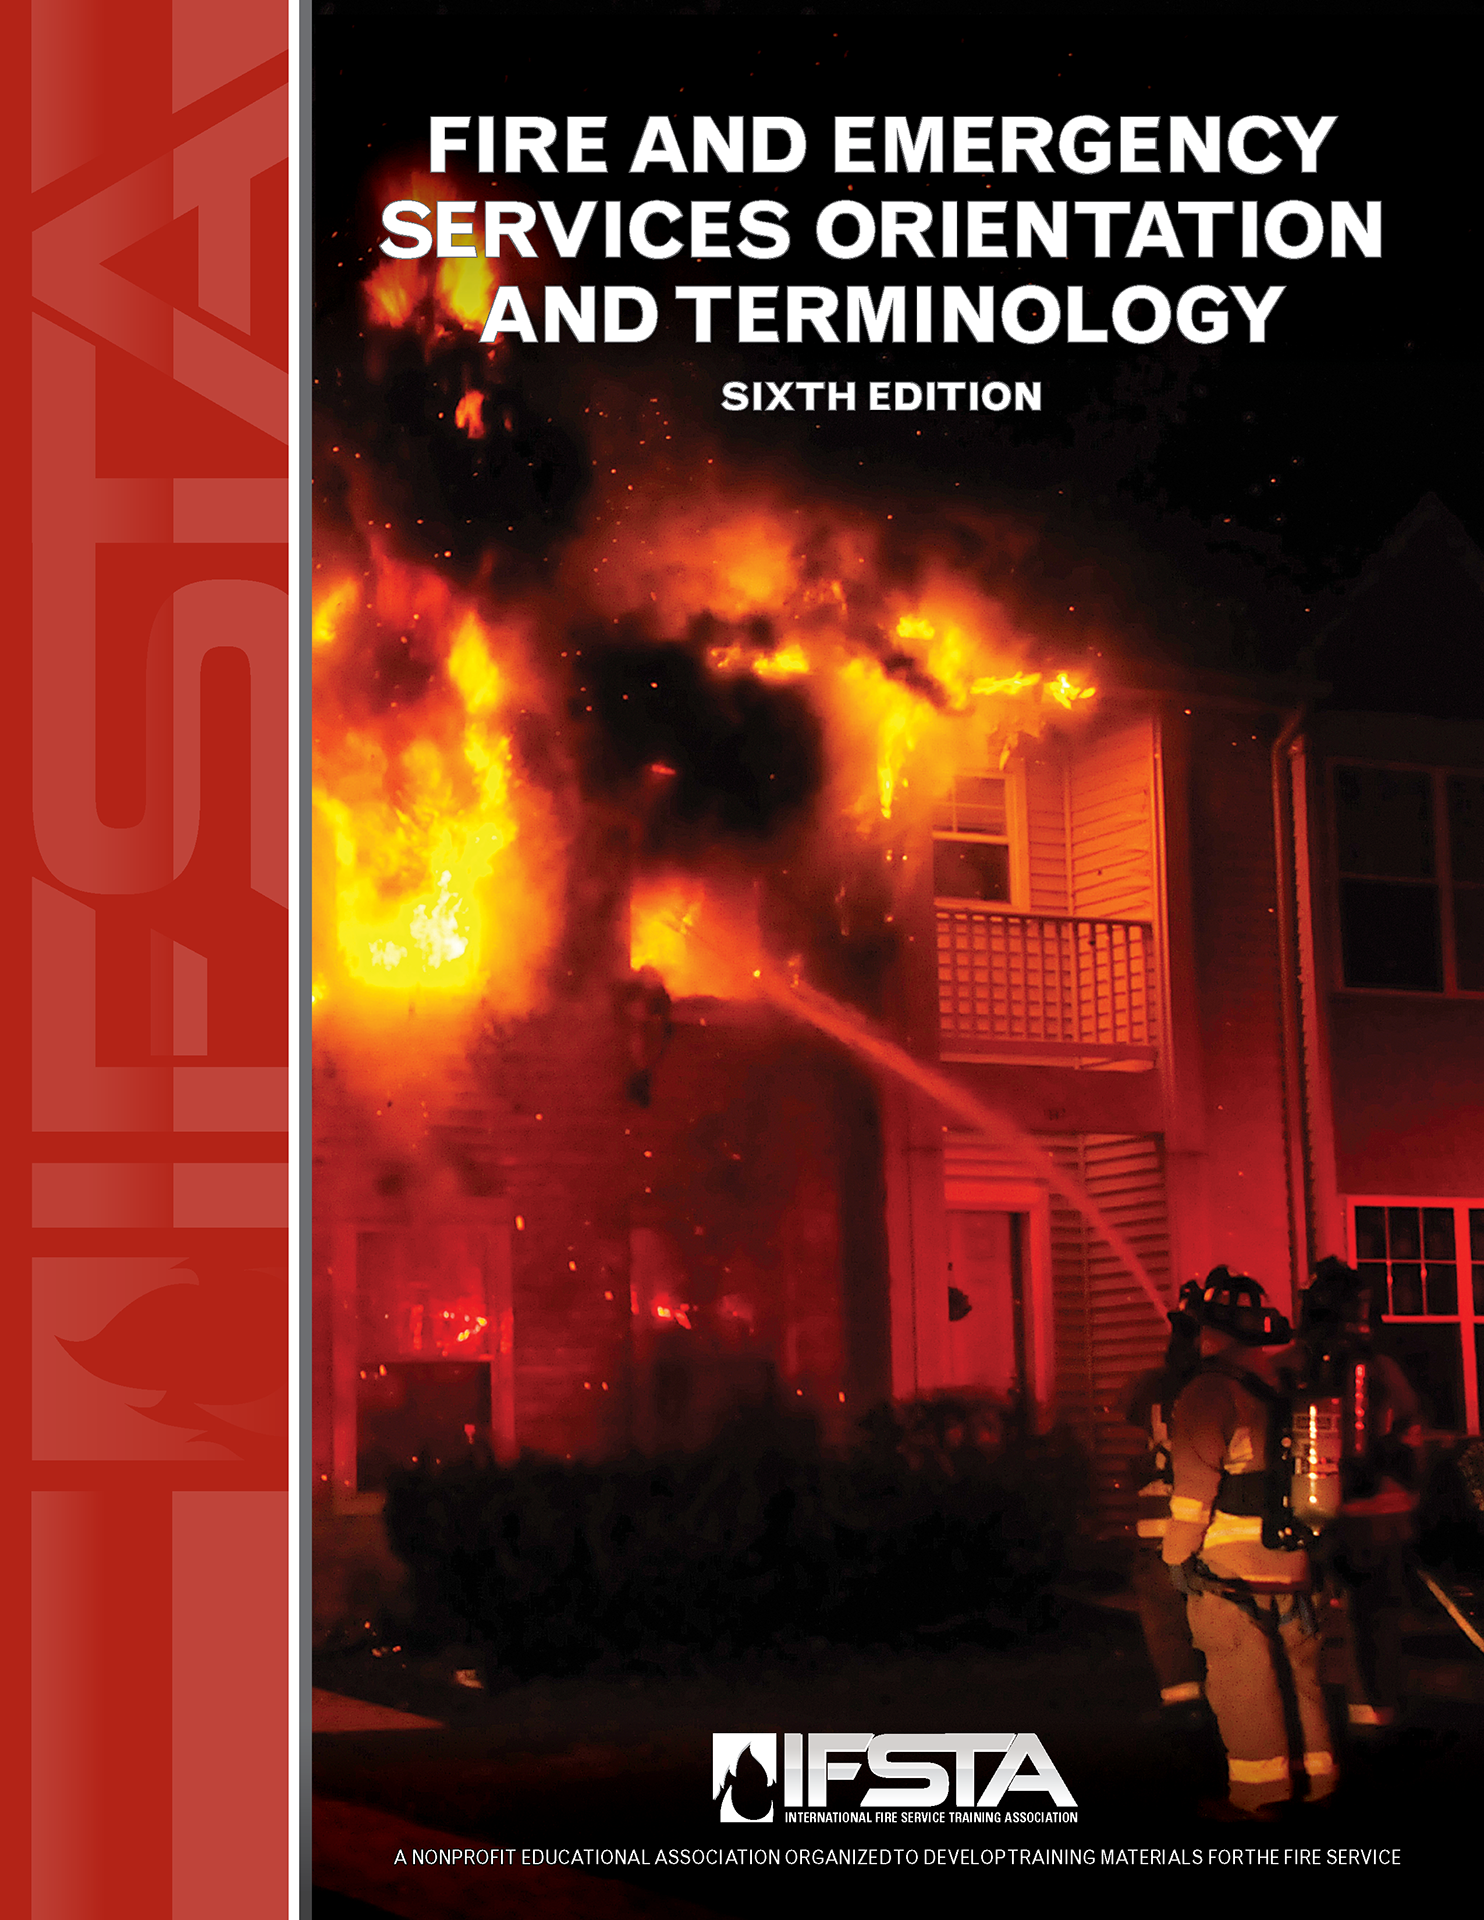 Fire and Emergency Services Orientation and Terminology, 6th Edition